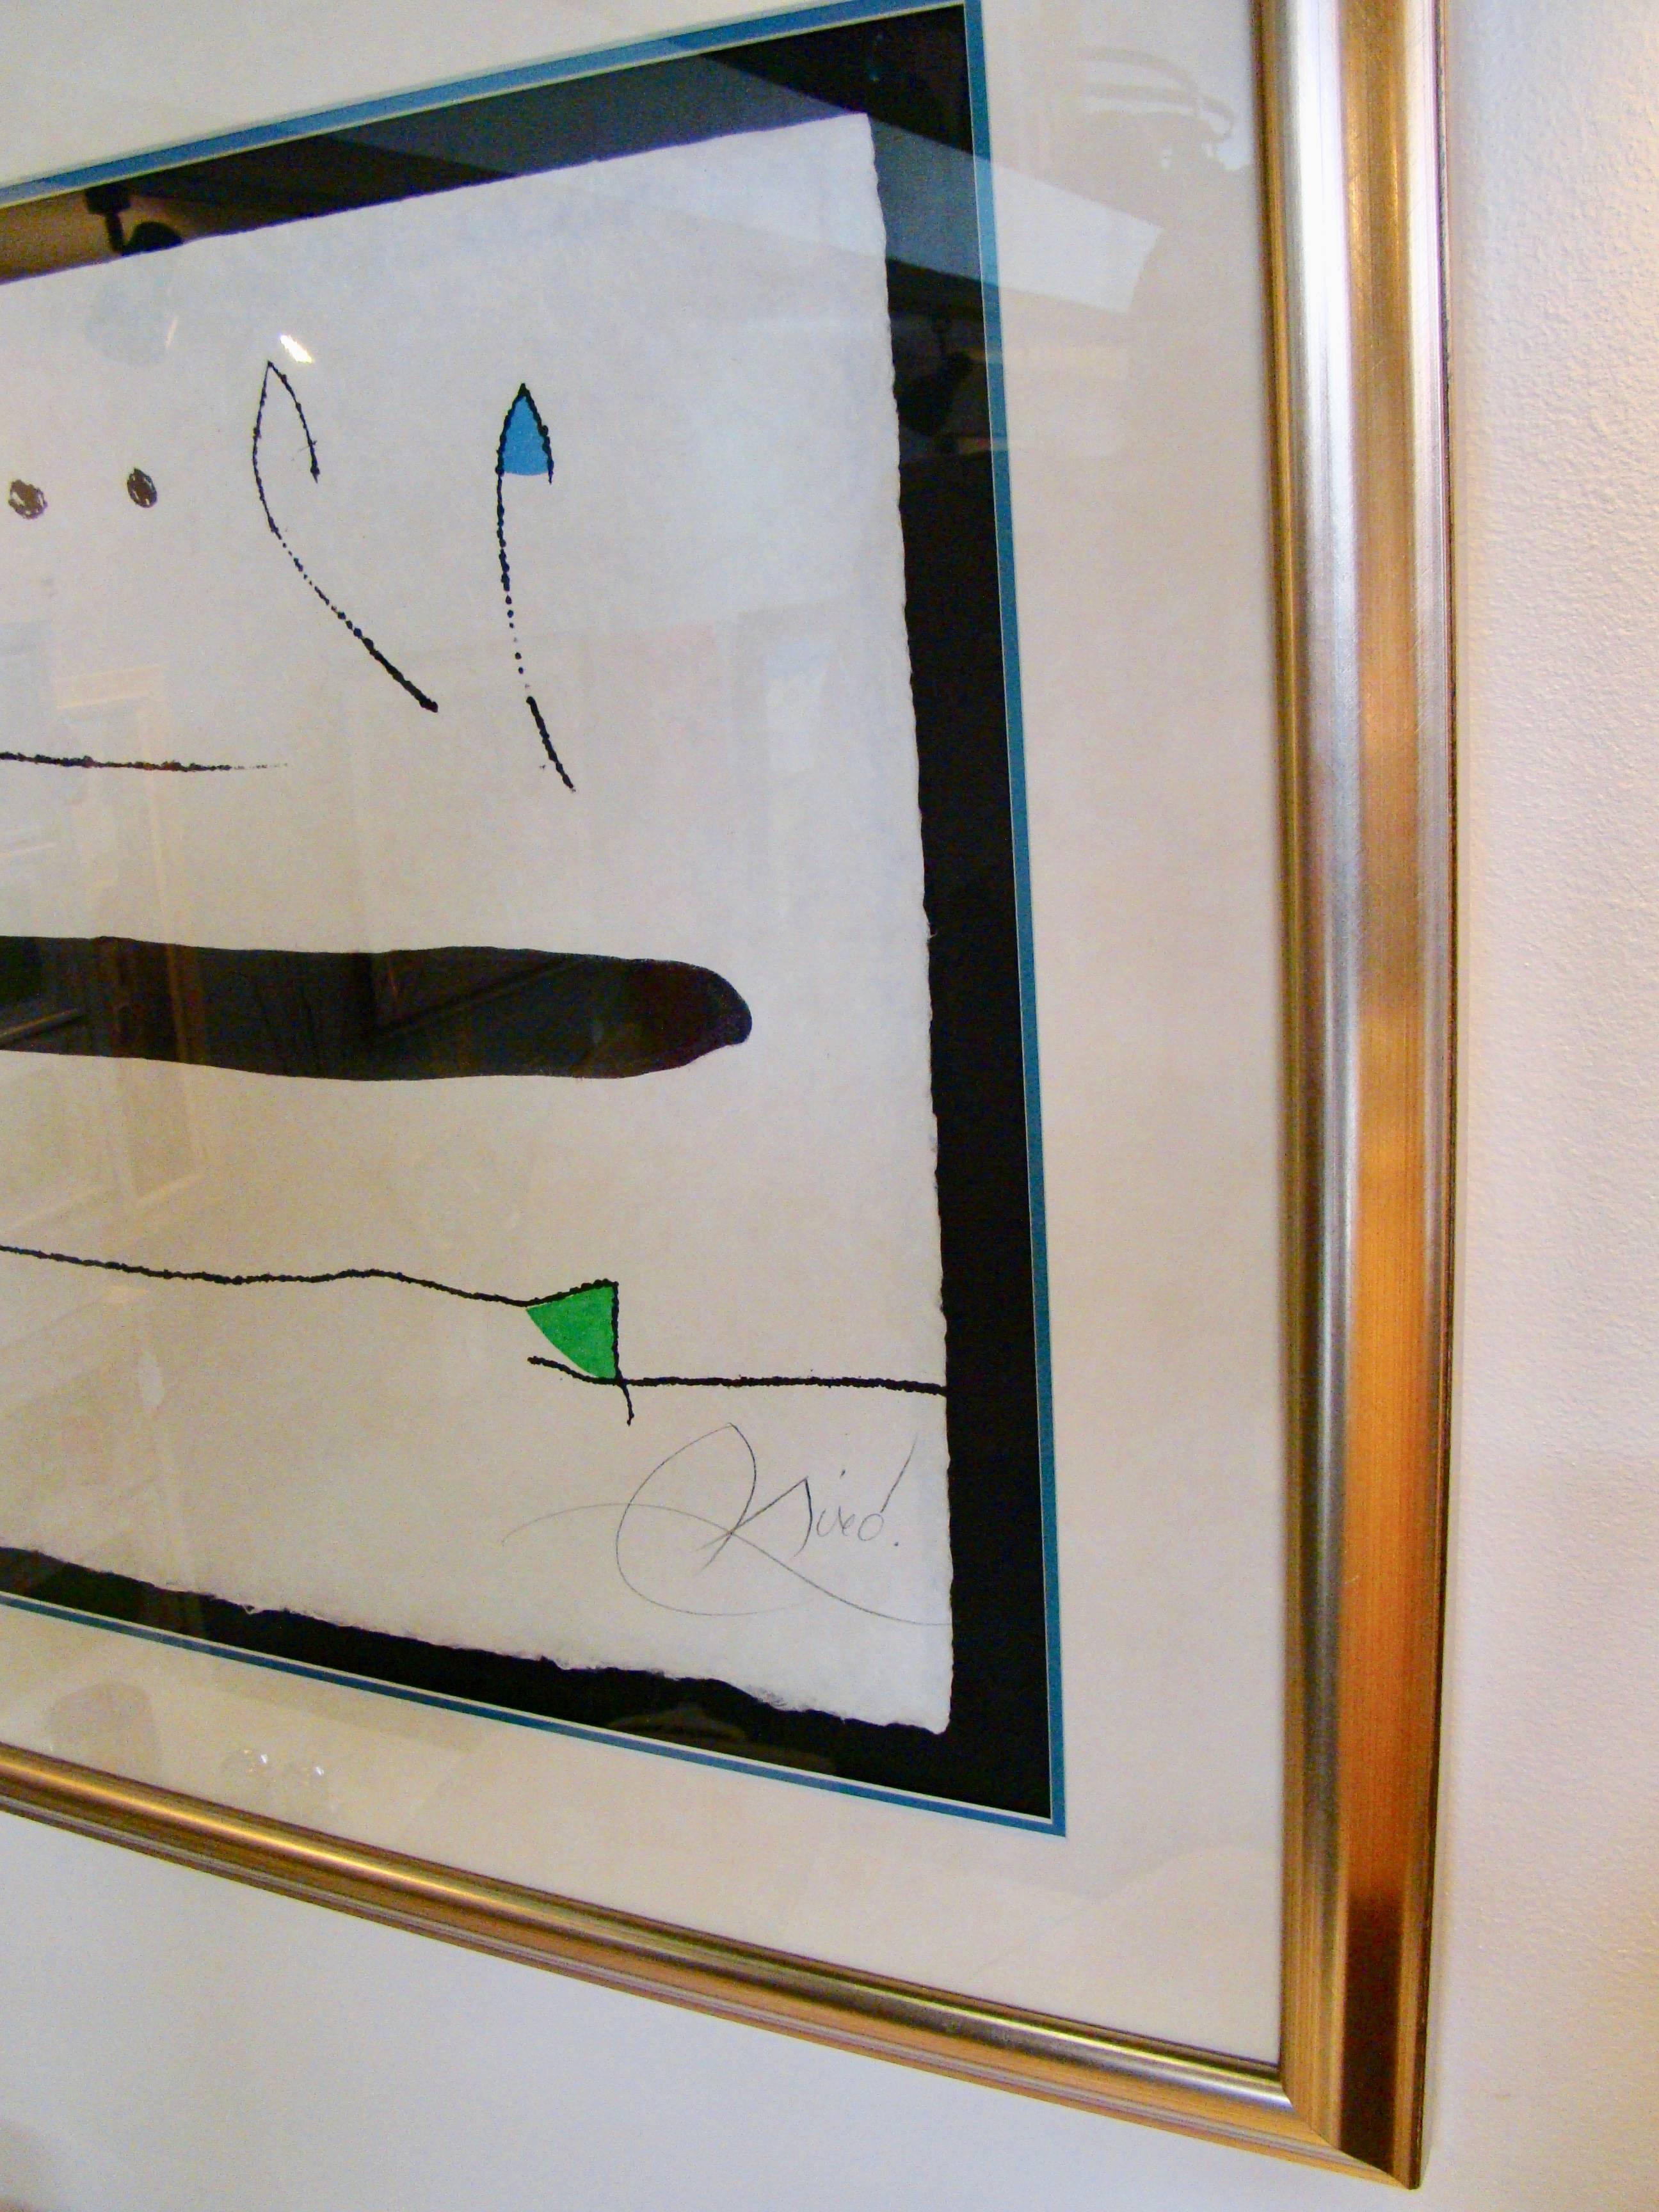 Etched Joan Miro 'Untitled' 'Limited Edition' Aquatint Etching, Signed and Numbered For Sale